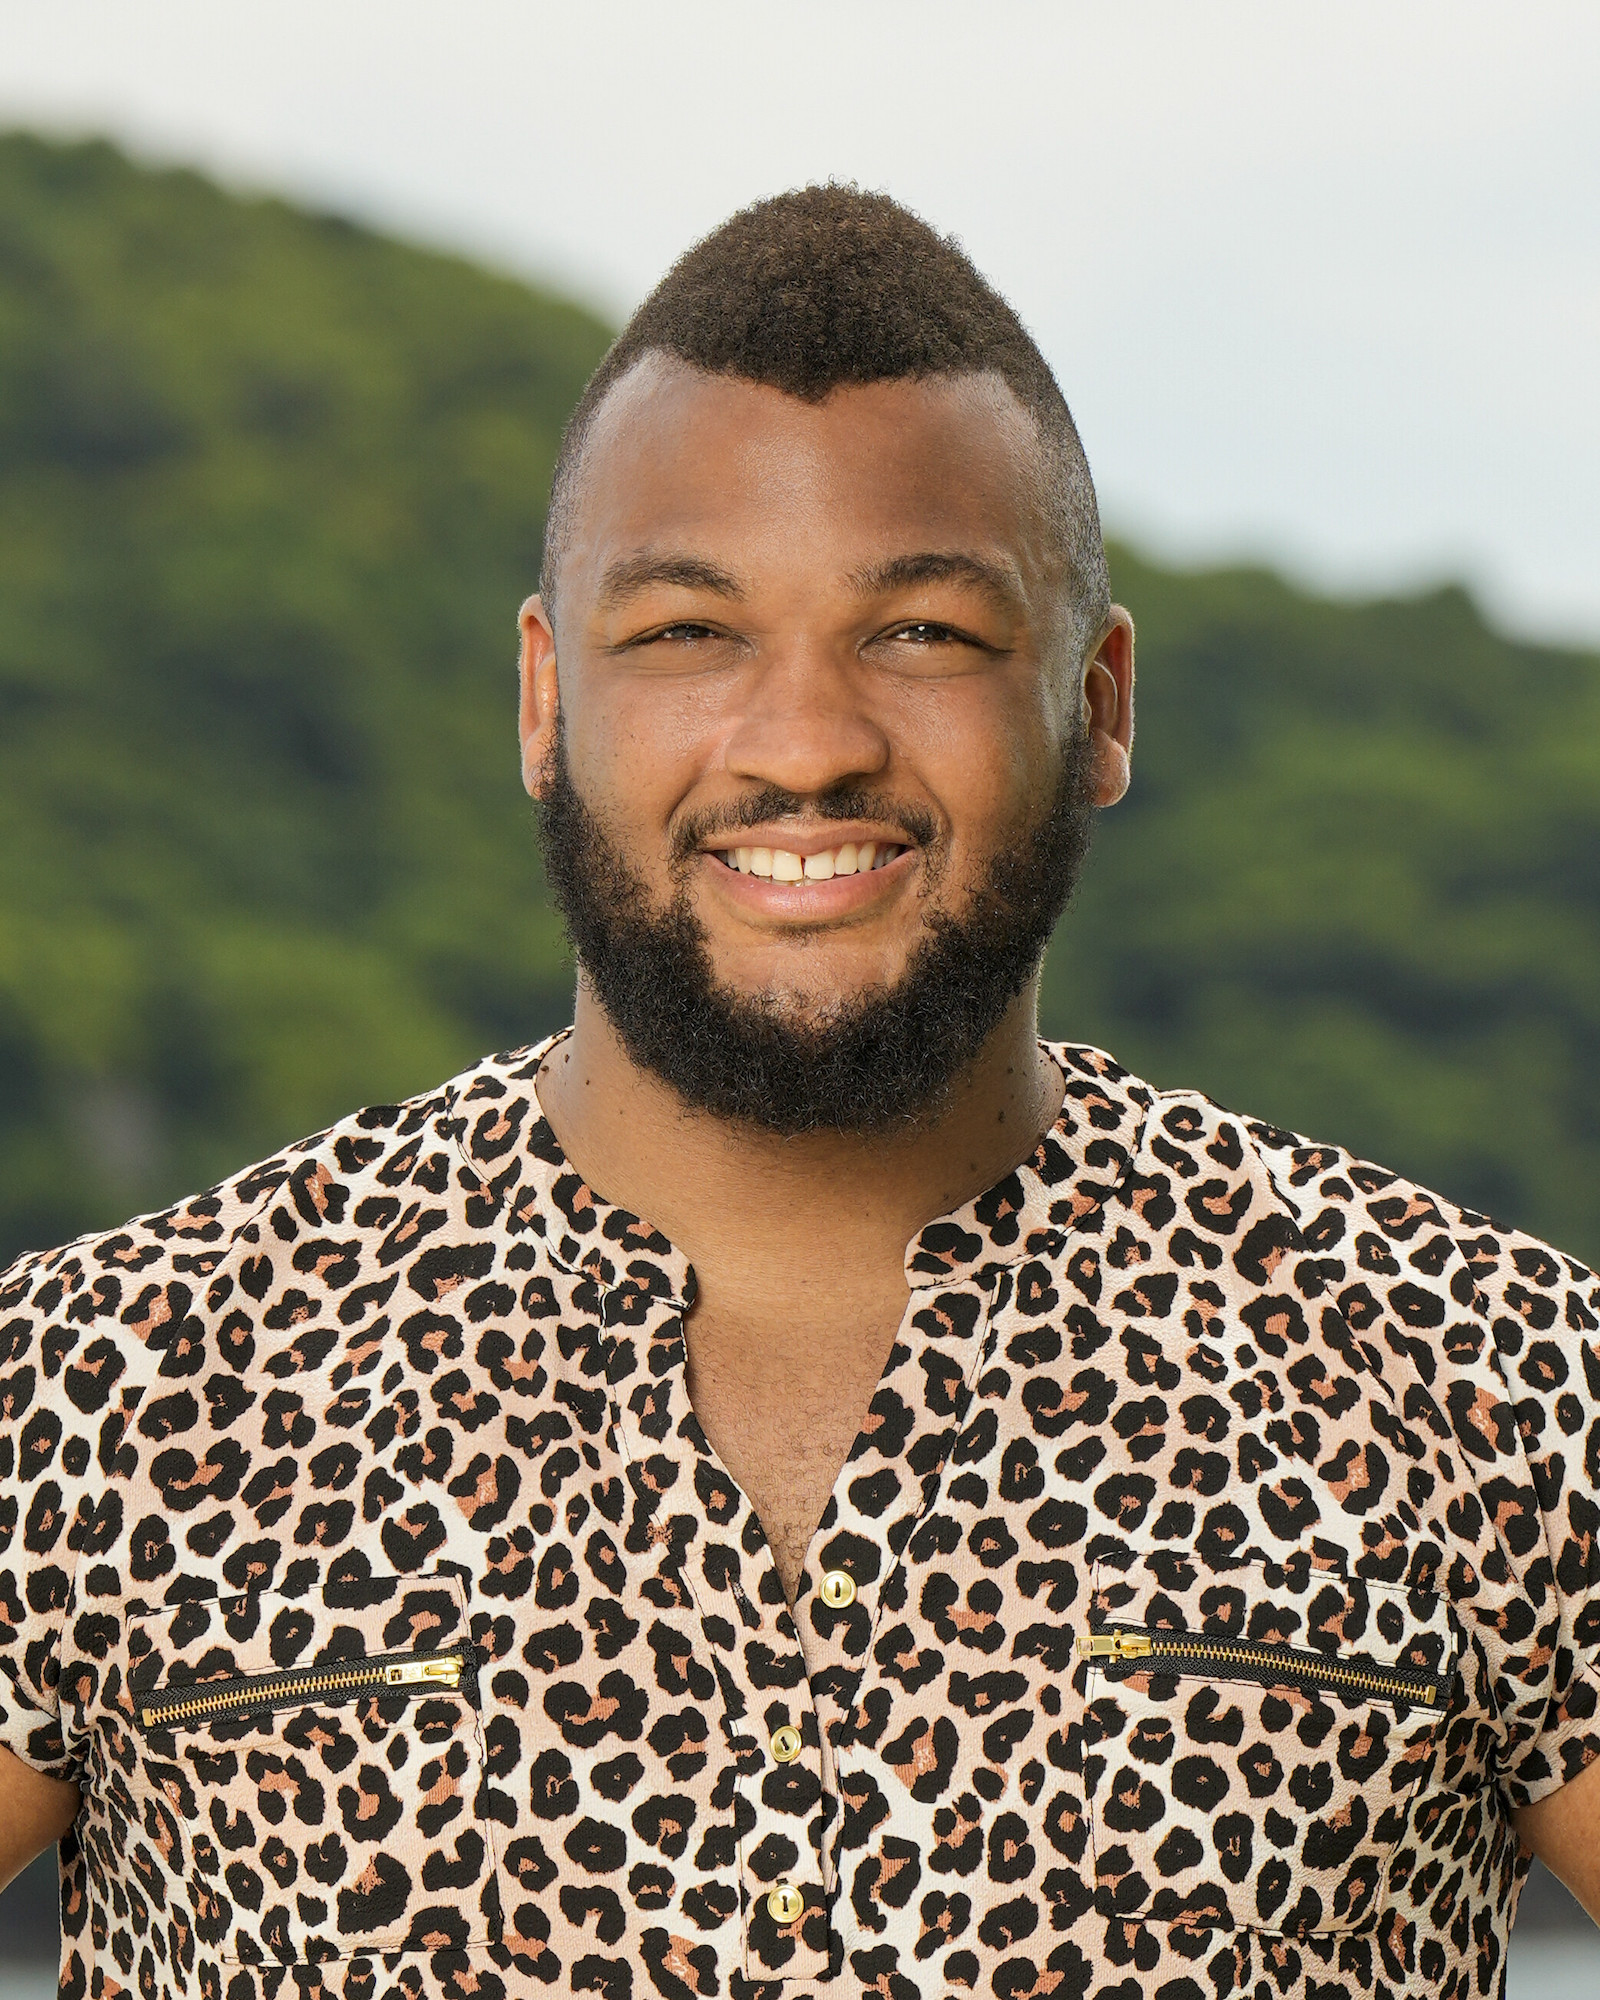 Survivor 45' players share first impressions of their castmates